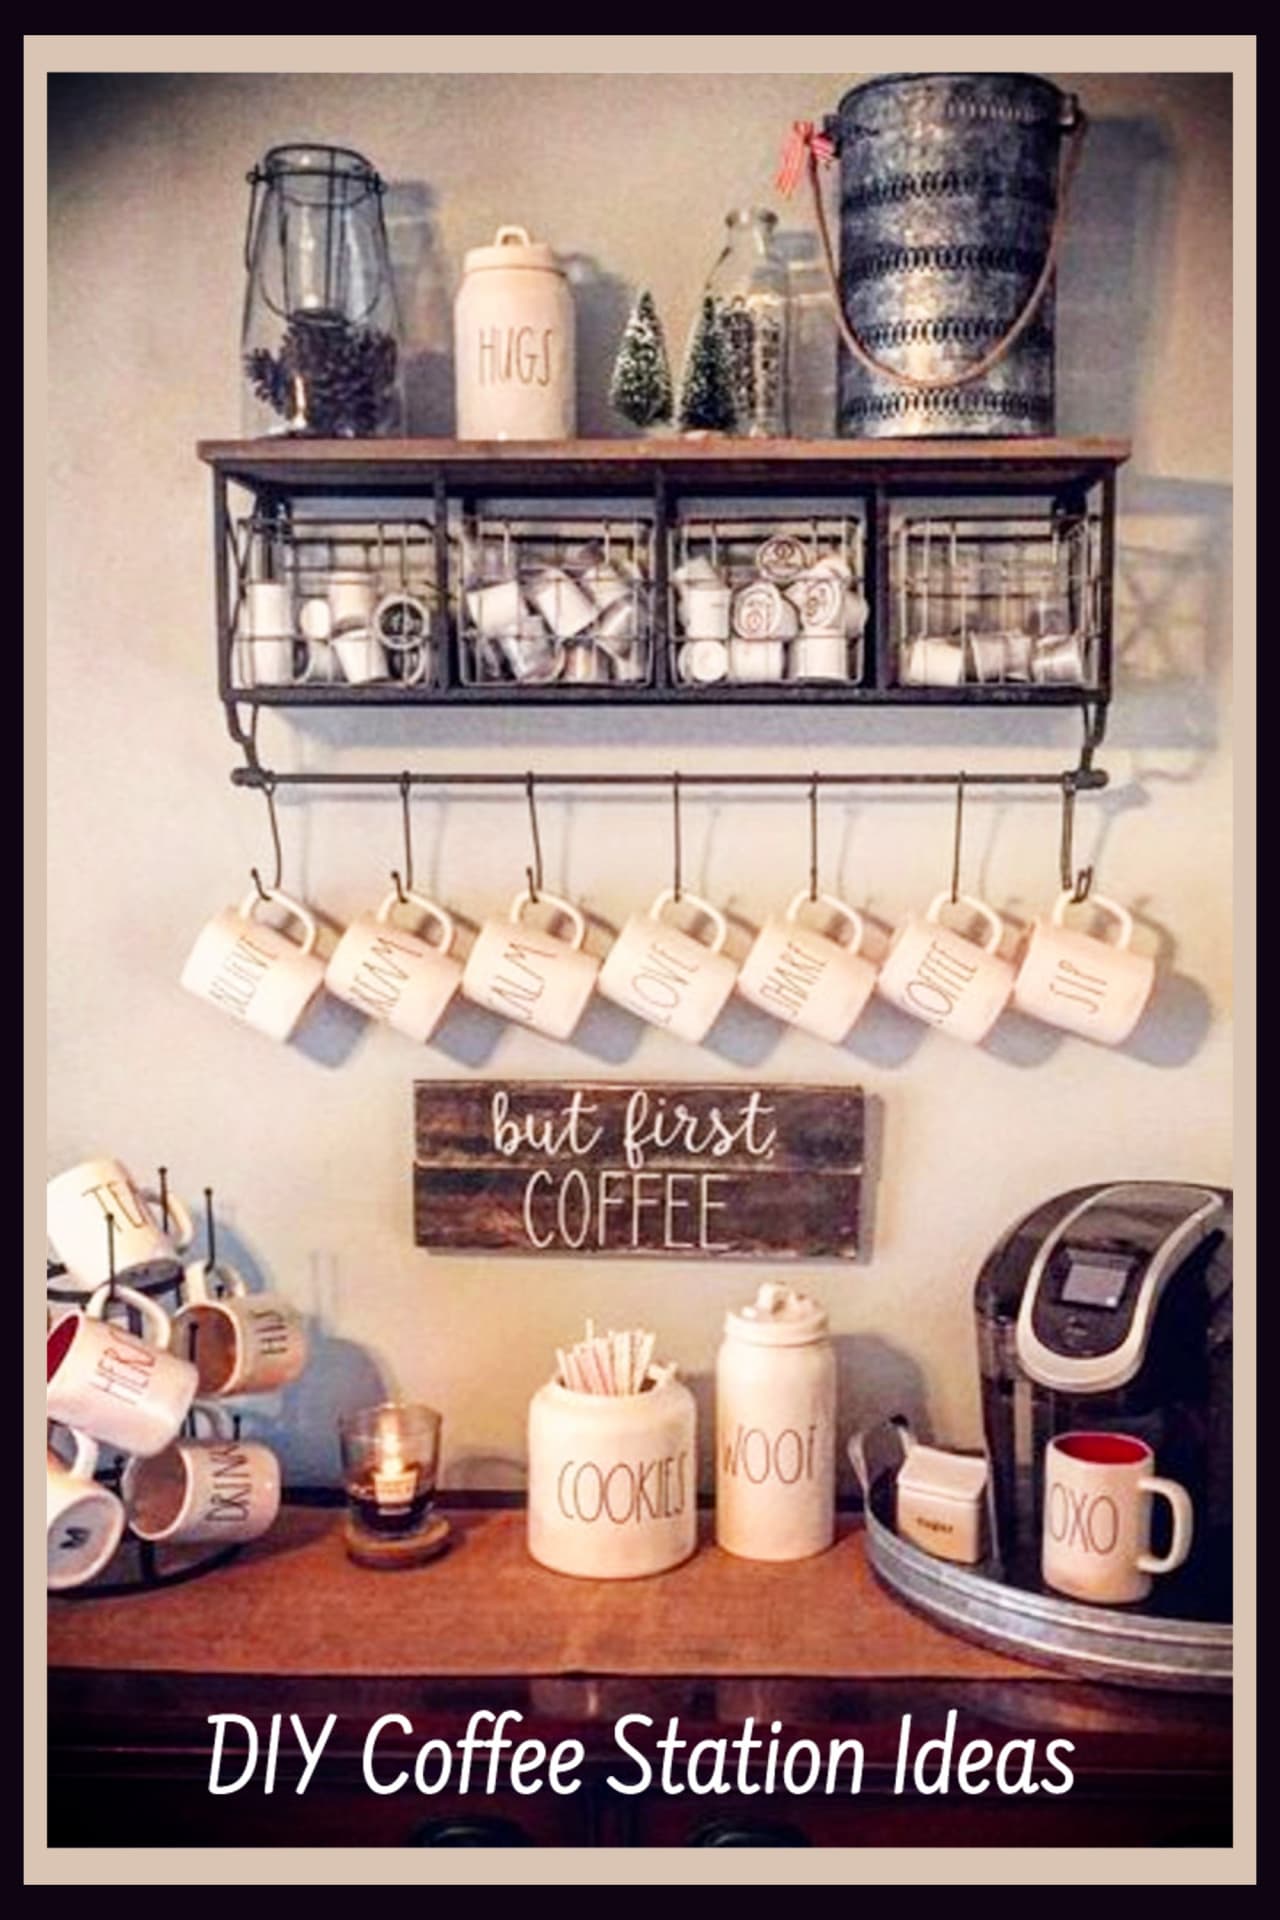 Coffee Bar Ideas - simple kitchen coffee bar ideas including small countertop coffee bar ideas and corner coffee bar ideas.  Gorgeous farmhouse coffee bars and rustic coffee bar coffee station ideas too.  Easy DIY coffee bar ideas for all size kitchens - even kitchens in apartments